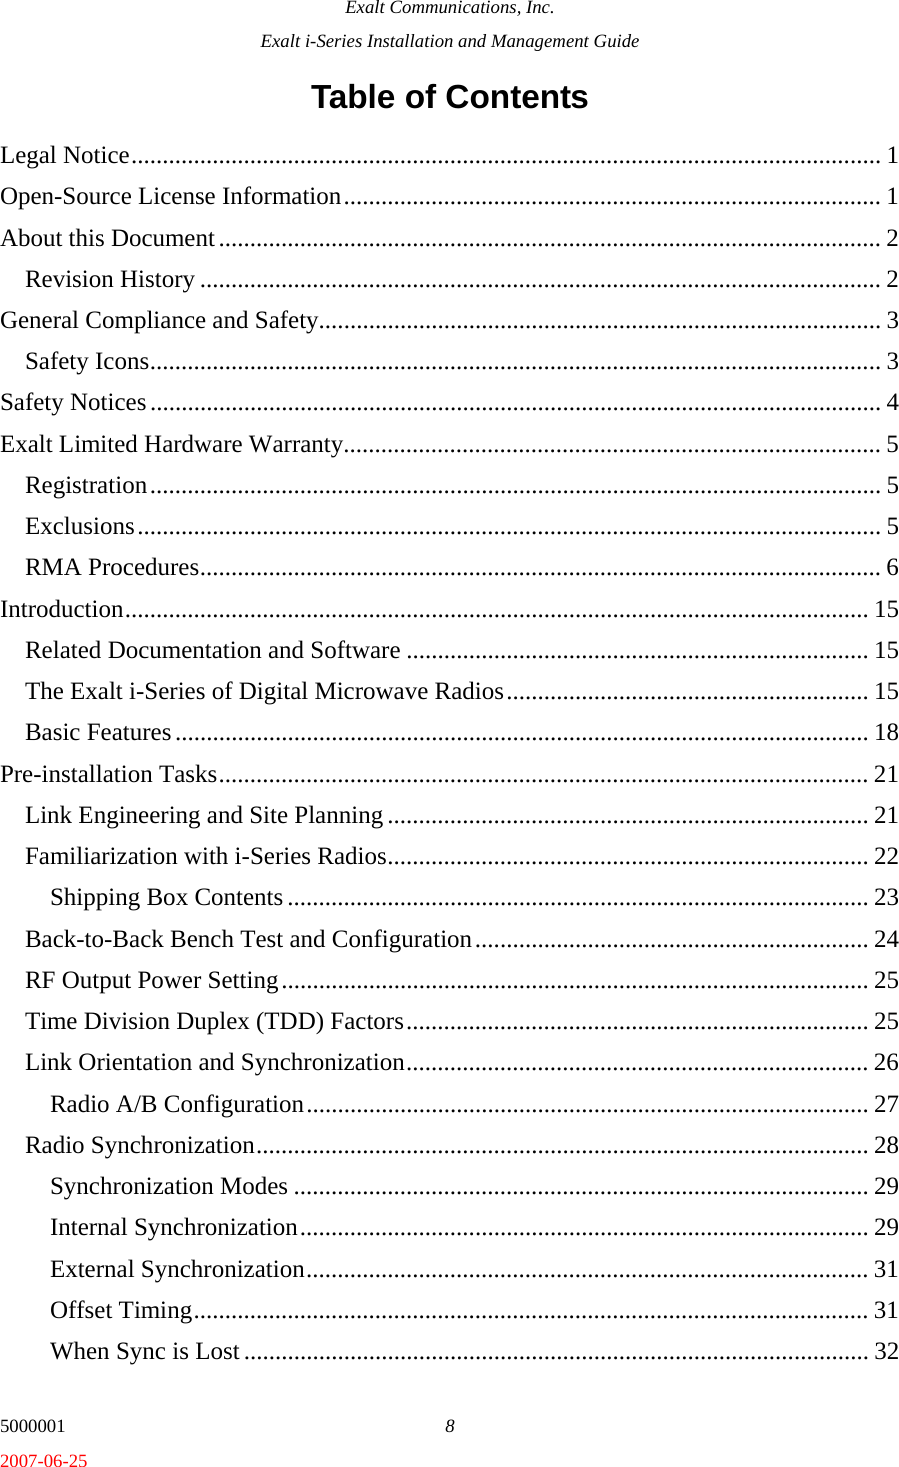 Exalt Communications, Inc. Exalt i-Series Installation and Management Guide 5000001  8 2007-06-25 Table of Contents Legal Notice........................................................................................................................ 1 Open-Source License Information...................................................................................... 1 About this Document.......................................................................................................... 2 Revision History ............................................................................................................. 2 General Compliance and Safety.......................................................................................... 3 Safety Icons..................................................................................................................... 3 Safety Notices..................................................................................................................... 4 Exalt Limited Hardware Warranty...................................................................................... 5 Registration..................................................................................................................... 5 Exclusions....................................................................................................................... 5 RMA Procedures............................................................................................................. 6 Introduction....................................................................................................................... 15 Related Documentation and Software .......................................................................... 15 The Exalt i-Series of Digital Microwave Radios.......................................................... 15 Basic Features............................................................................................................... 18 Pre-installation Tasks........................................................................................................ 21 Link Engineering and Site Planning ............................................................................. 21 Familiarization with i-Series Radios............................................................................. 22 Shipping Box Contents ............................................................................................. 23 Back-to-Back Bench Test and Configuration............................................................... 24 RF Output Power Setting.............................................................................................. 25 Time Division Duplex (TDD) Factors.......................................................................... 25 Link Orientation and Synchronization.......................................................................... 26 Radio A/B Configuration.......................................................................................... 27 Radio Synchronization.................................................................................................. 28 Synchronization Modes ............................................................................................ 29 Internal Synchronization........................................................................................... 29 External Synchronization.......................................................................................... 31 Offset Timing............................................................................................................ 31 When Sync is Lost .................................................................................................... 32 